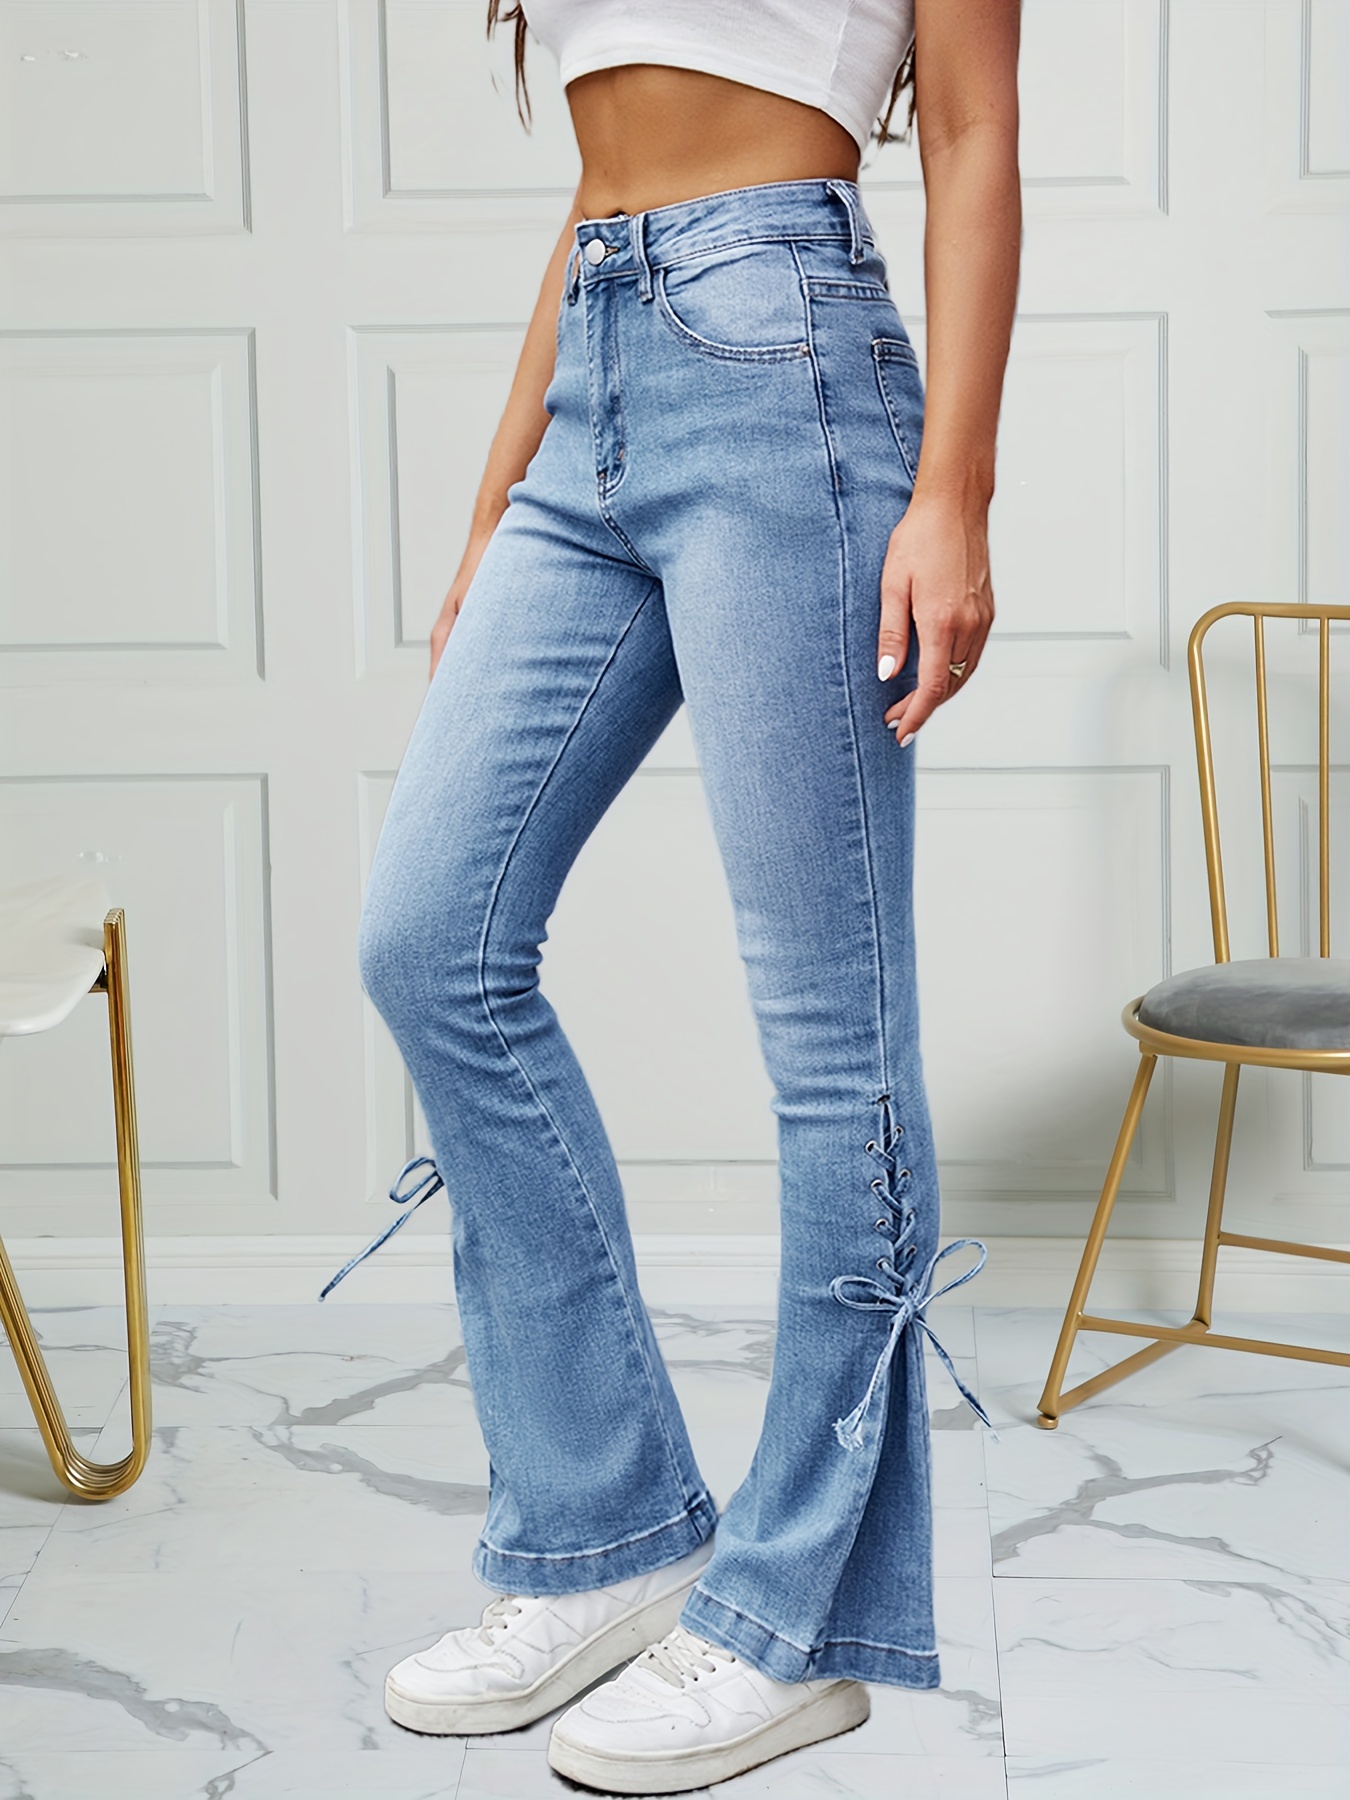 Lace Up Tie Side Bootcut Jeans, High Strech Washed Bow Bell Bottom Denim  Pants, Kawaii Cute, Women's Denim Jeans & Clothing